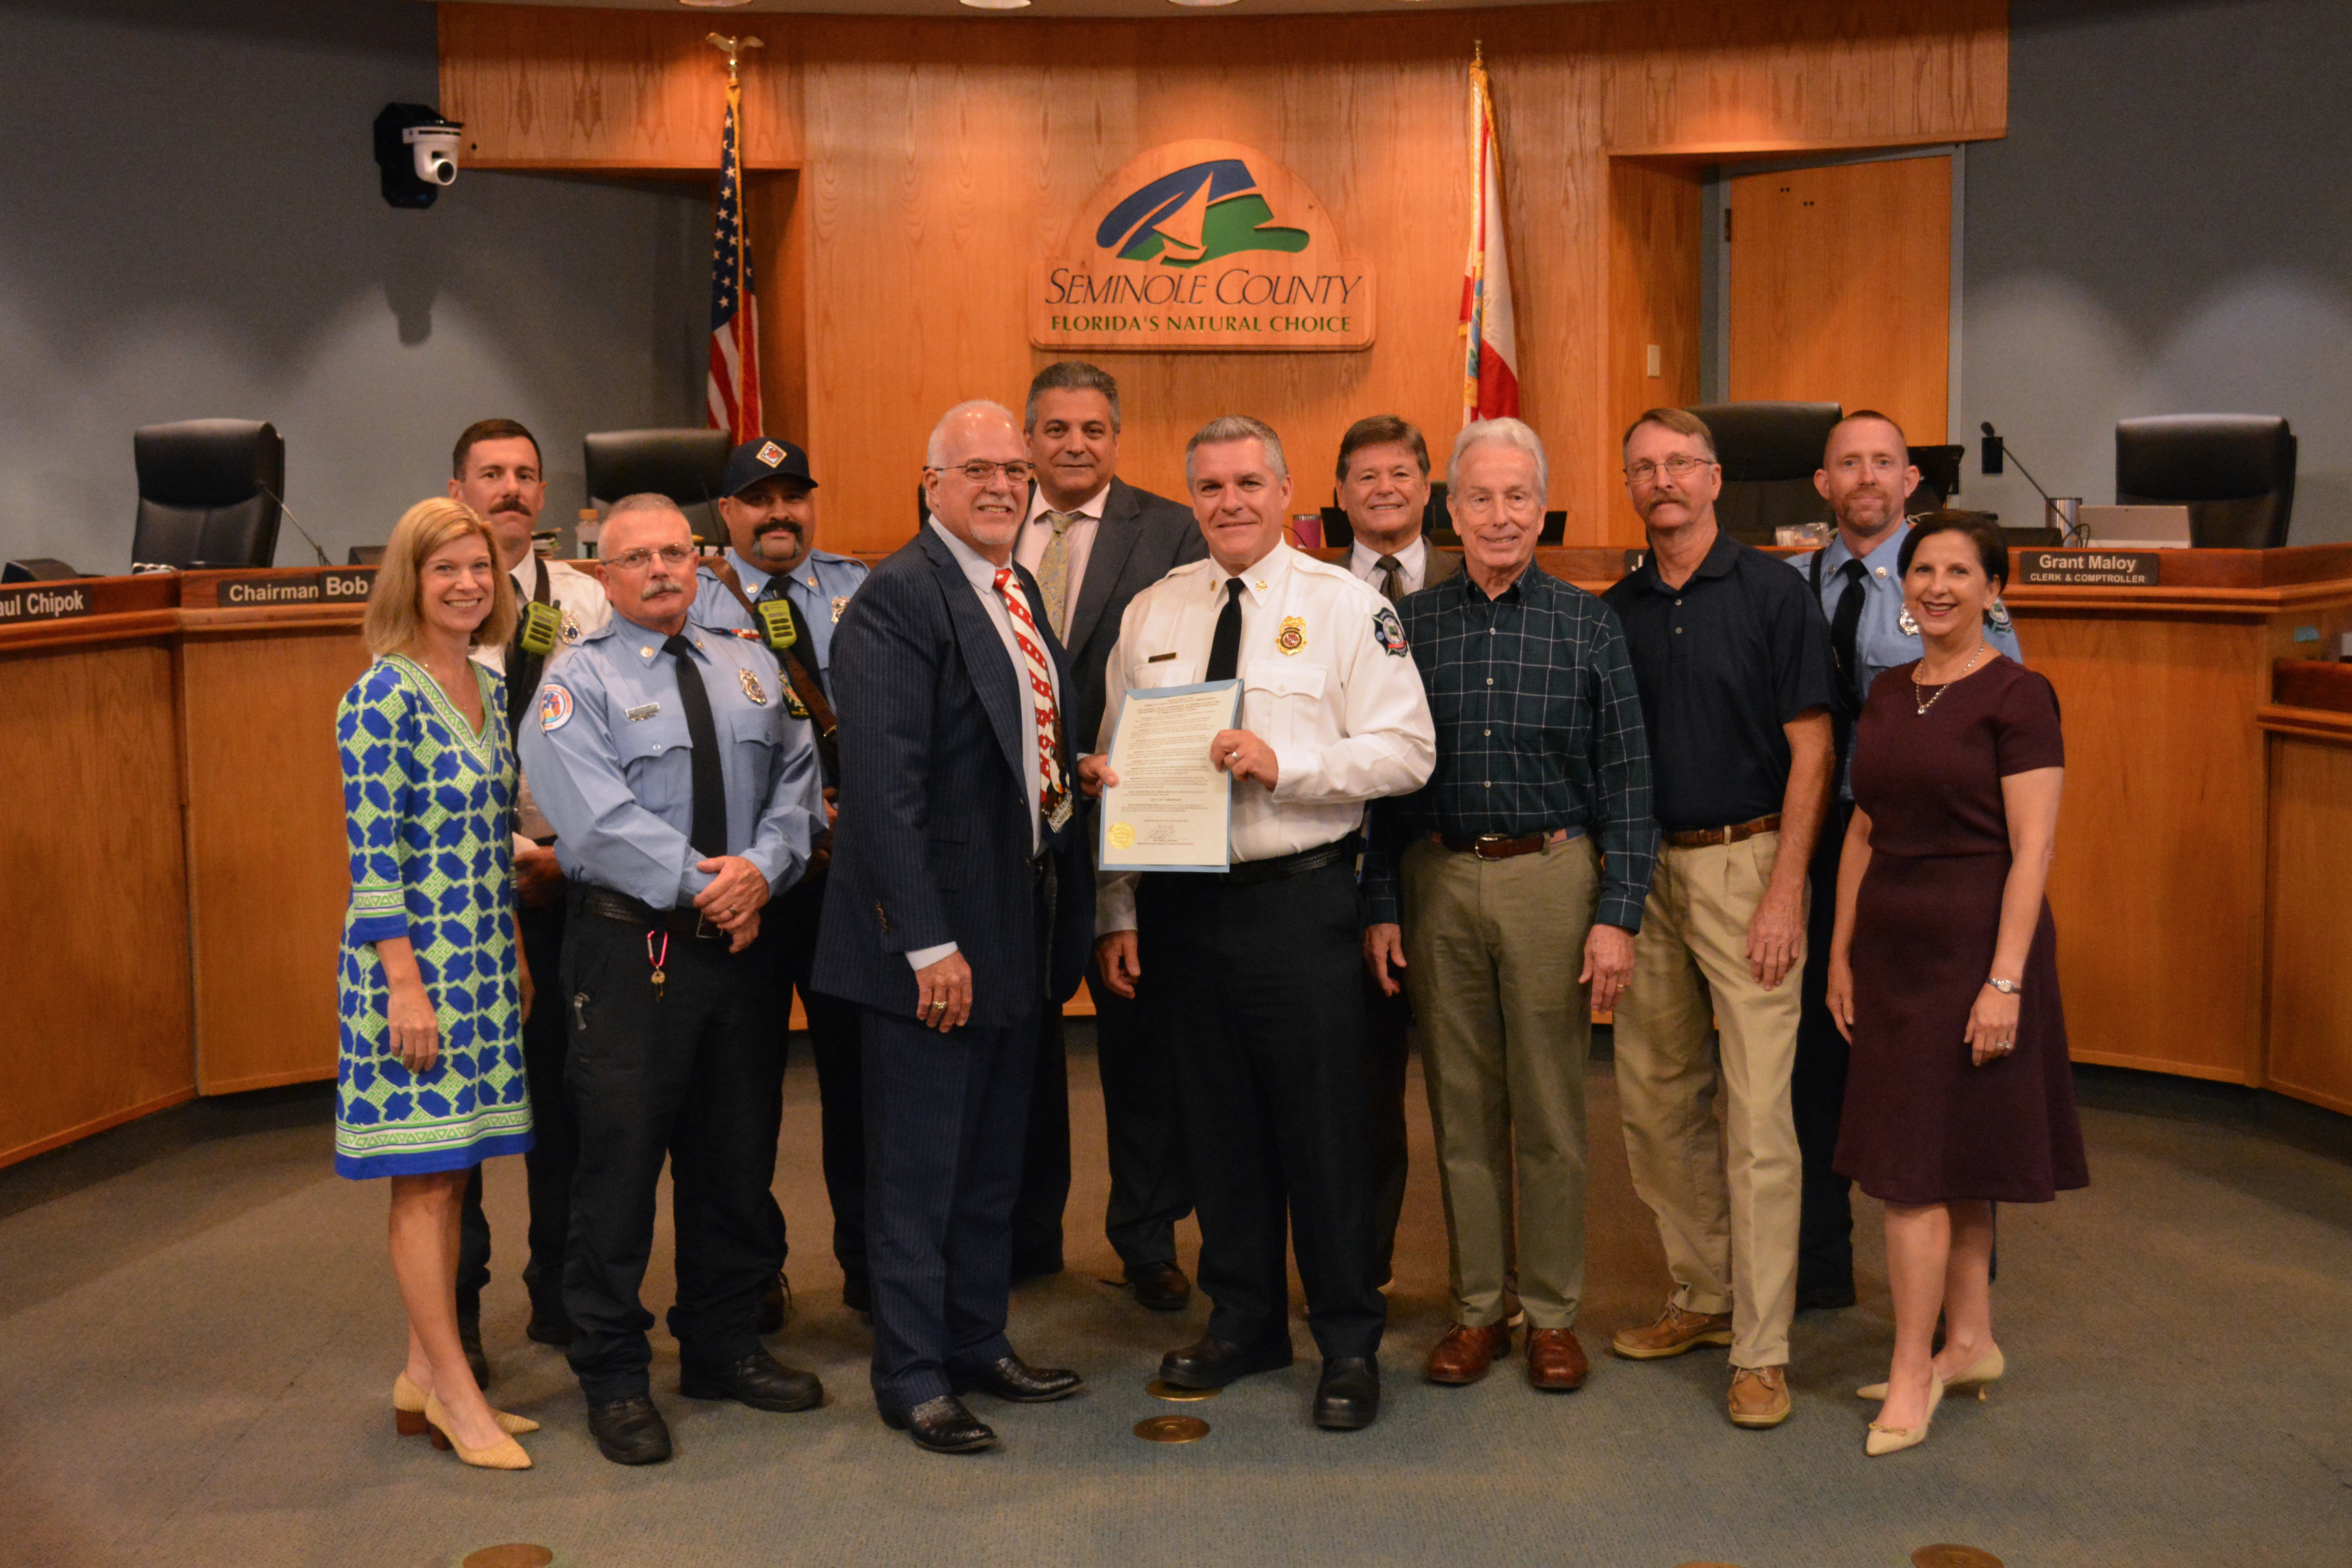 Resolution recognizing the 30th anniversary of Seminole County Fire Department's Special Hazards and Operations Team (SHOT) and Matt Kinley, Fire Chief.